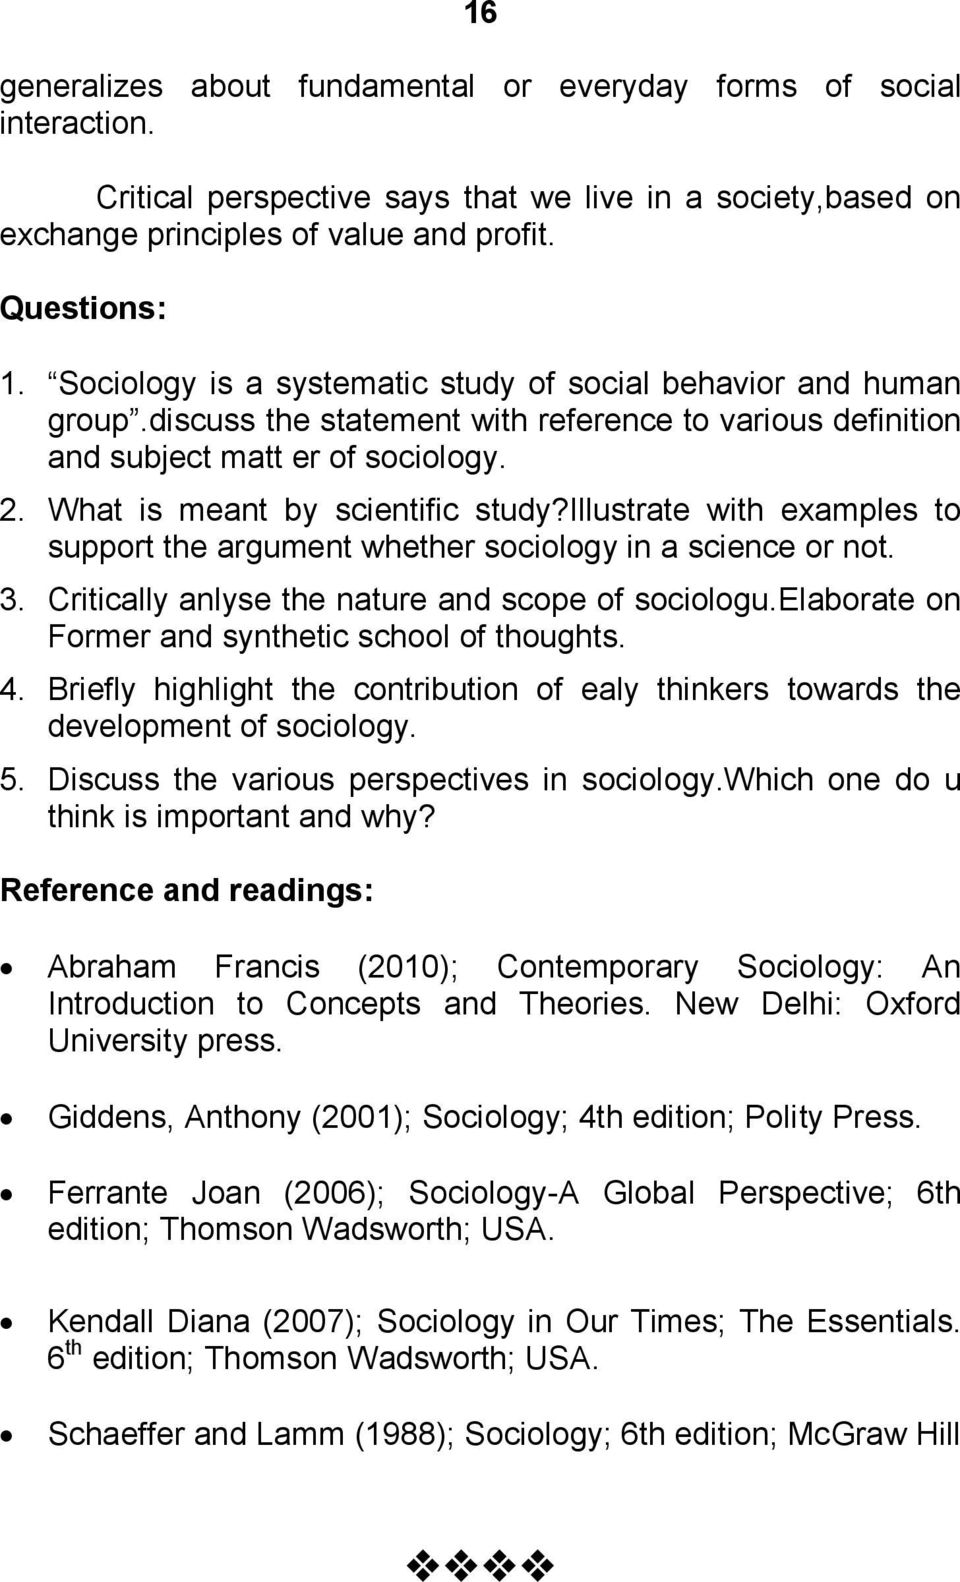 Analysis of giddens on agency and structure sociology essay